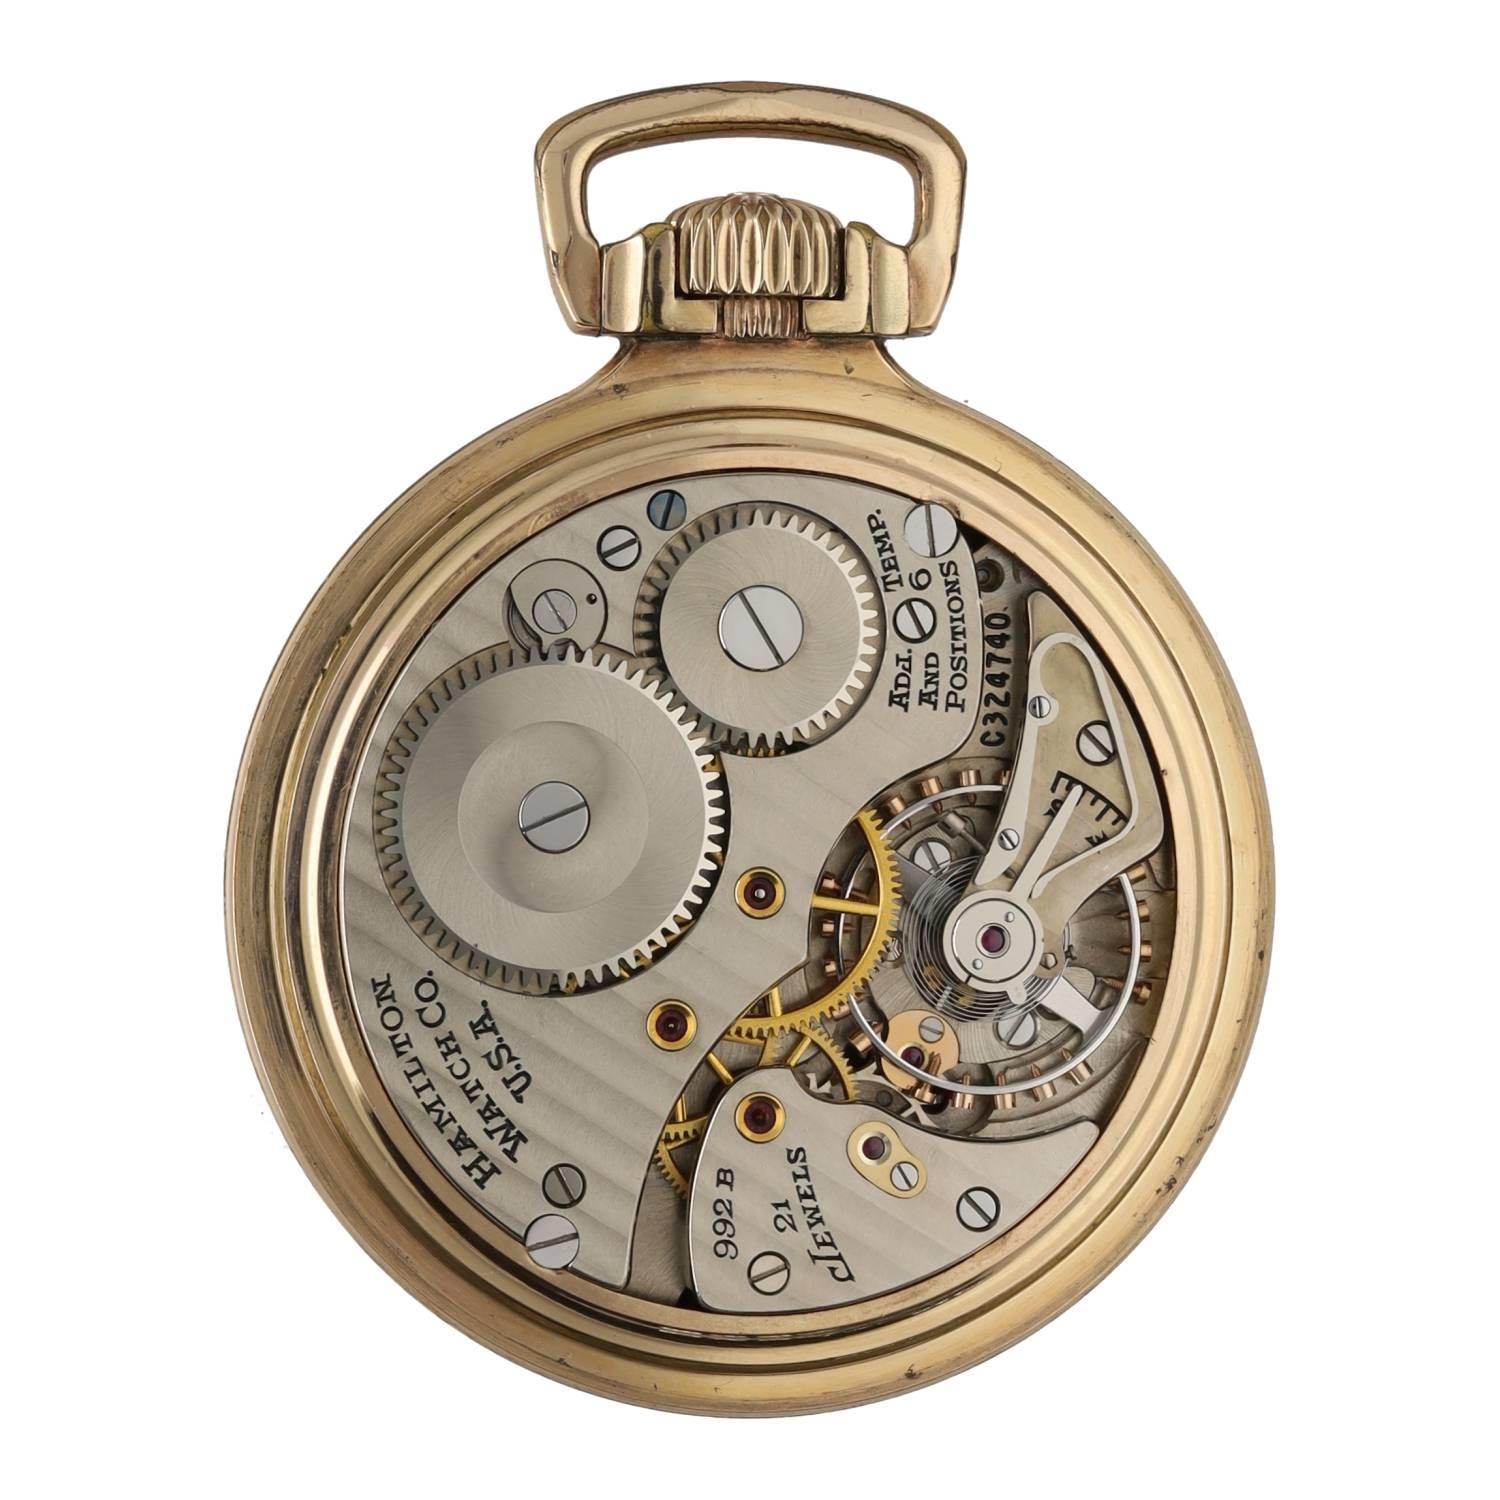 Hamilton 'Railway Special' gold plated lever set pocket watch, circa 1948, serial no. C324740, - Image 3 of 4